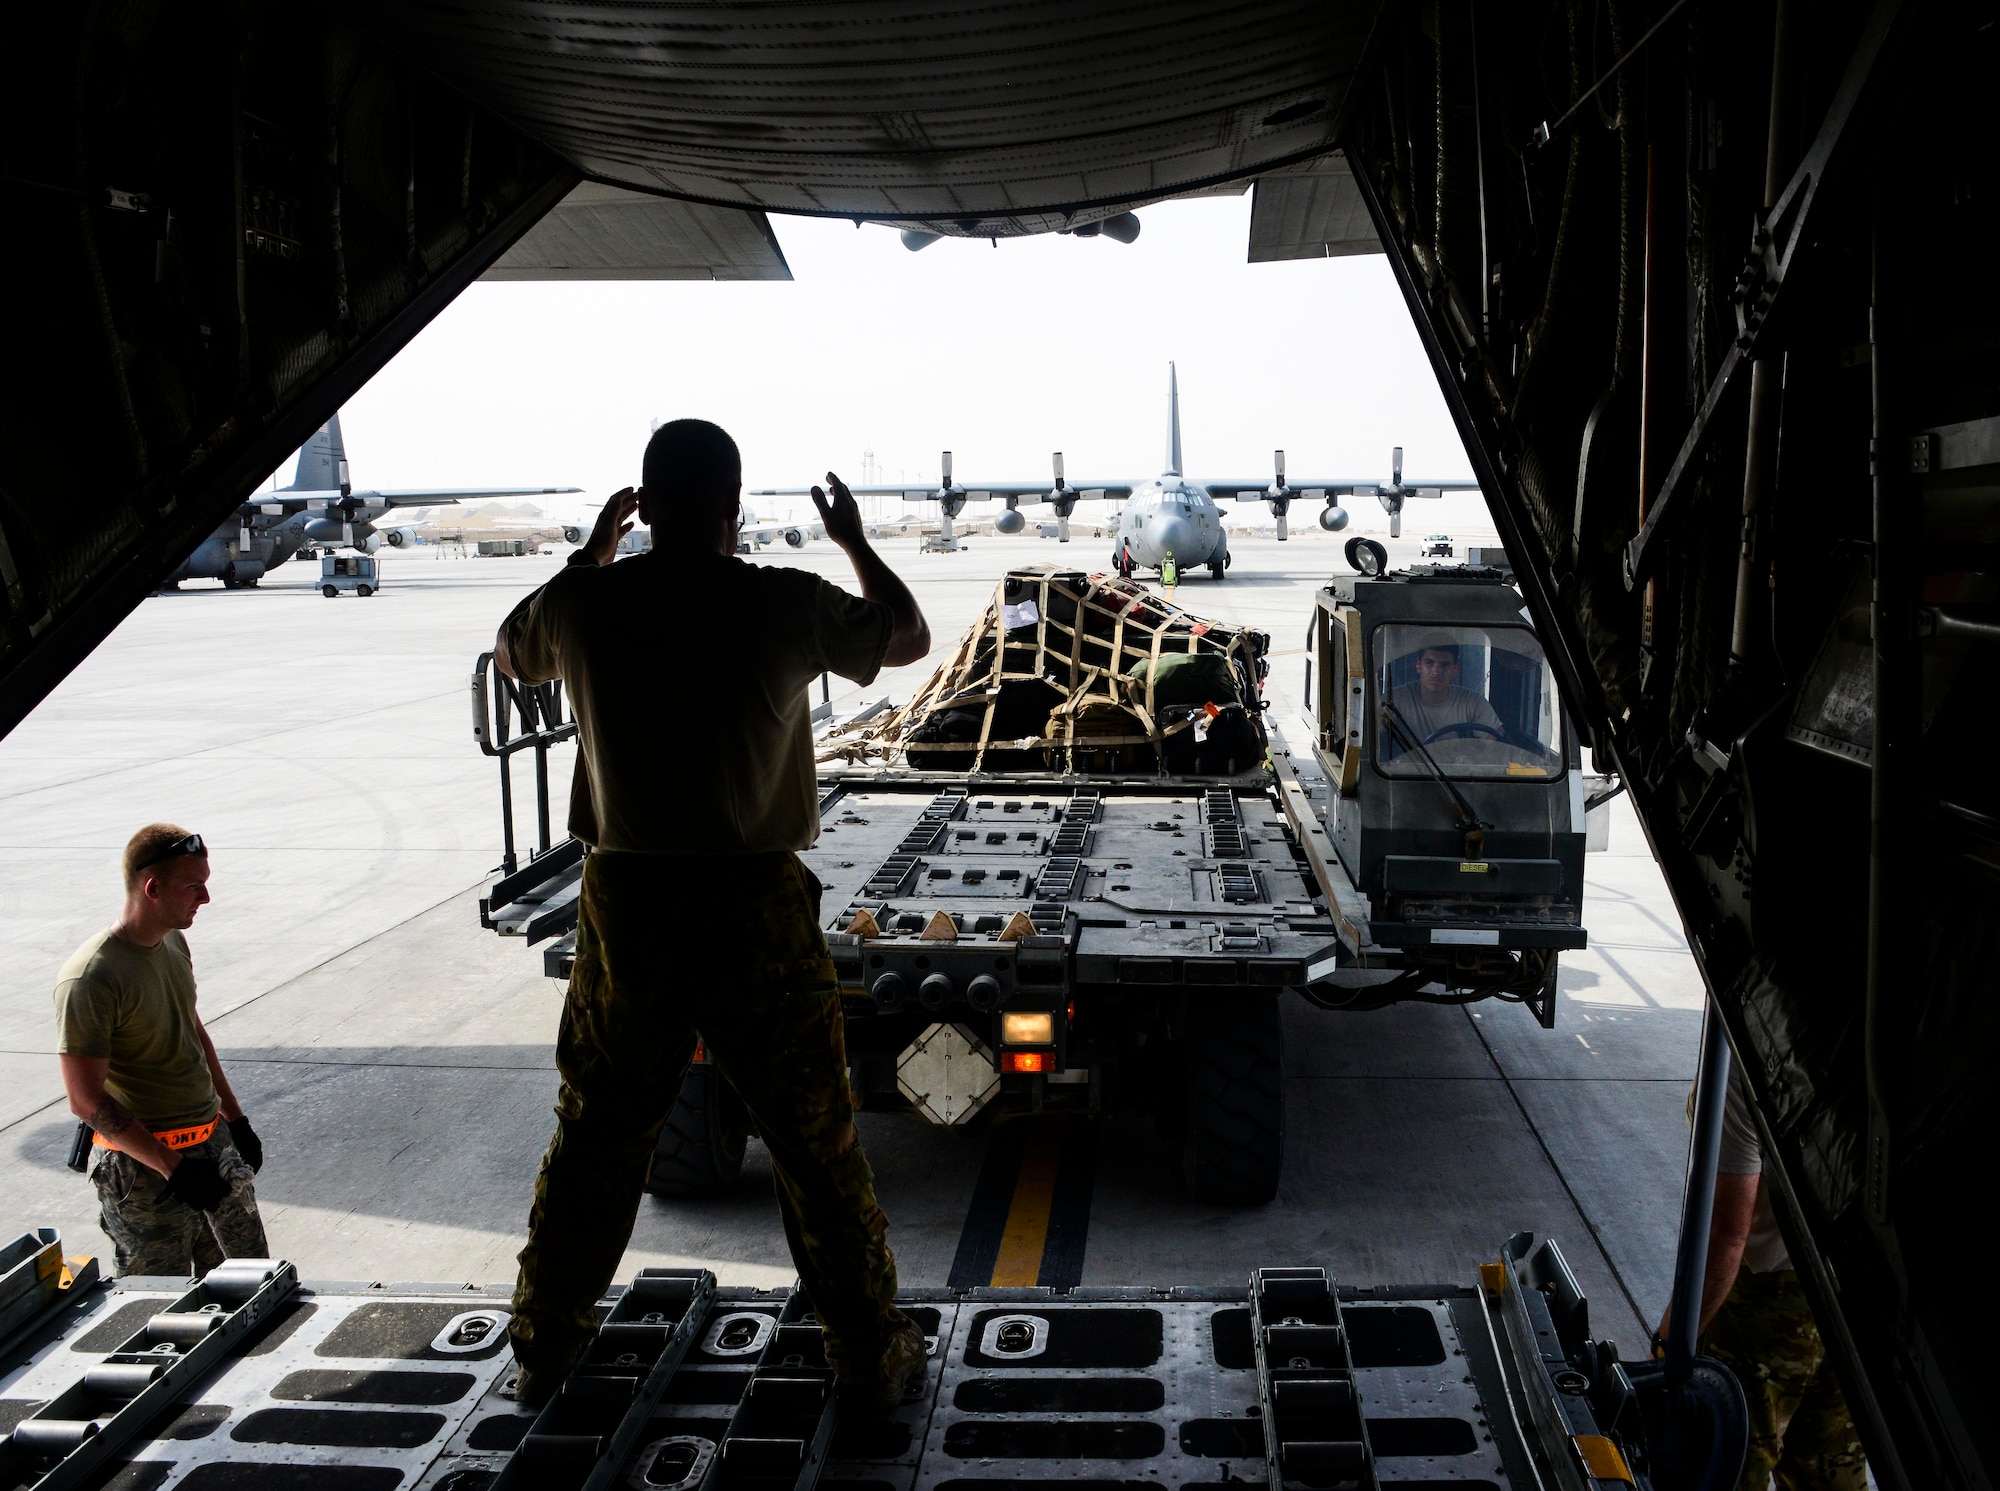 Master Sgt. Maurice Shivers, 746th Expeditionary Airlift Squadron loadmaster, marshals a K-Loader vehicle in preparation of loading equipment into a C-130 Hercules June 28, 2016, at Al Udeid Air Base, Qatar. A total of 147 Airmen from the 914th Airlift Wing out of Niagara Falls Air Reserve Station, N.Y., are deployed here under the 746h EAS and 746th Expeditionary Aircraft Maintenance Unit to execute C-130 combat missions in support of Operation Inherent Resolve and Operation Freedom’s Sentinel. (U.S. Air Force photo/Senior Airman Janelle Patiño/Released)